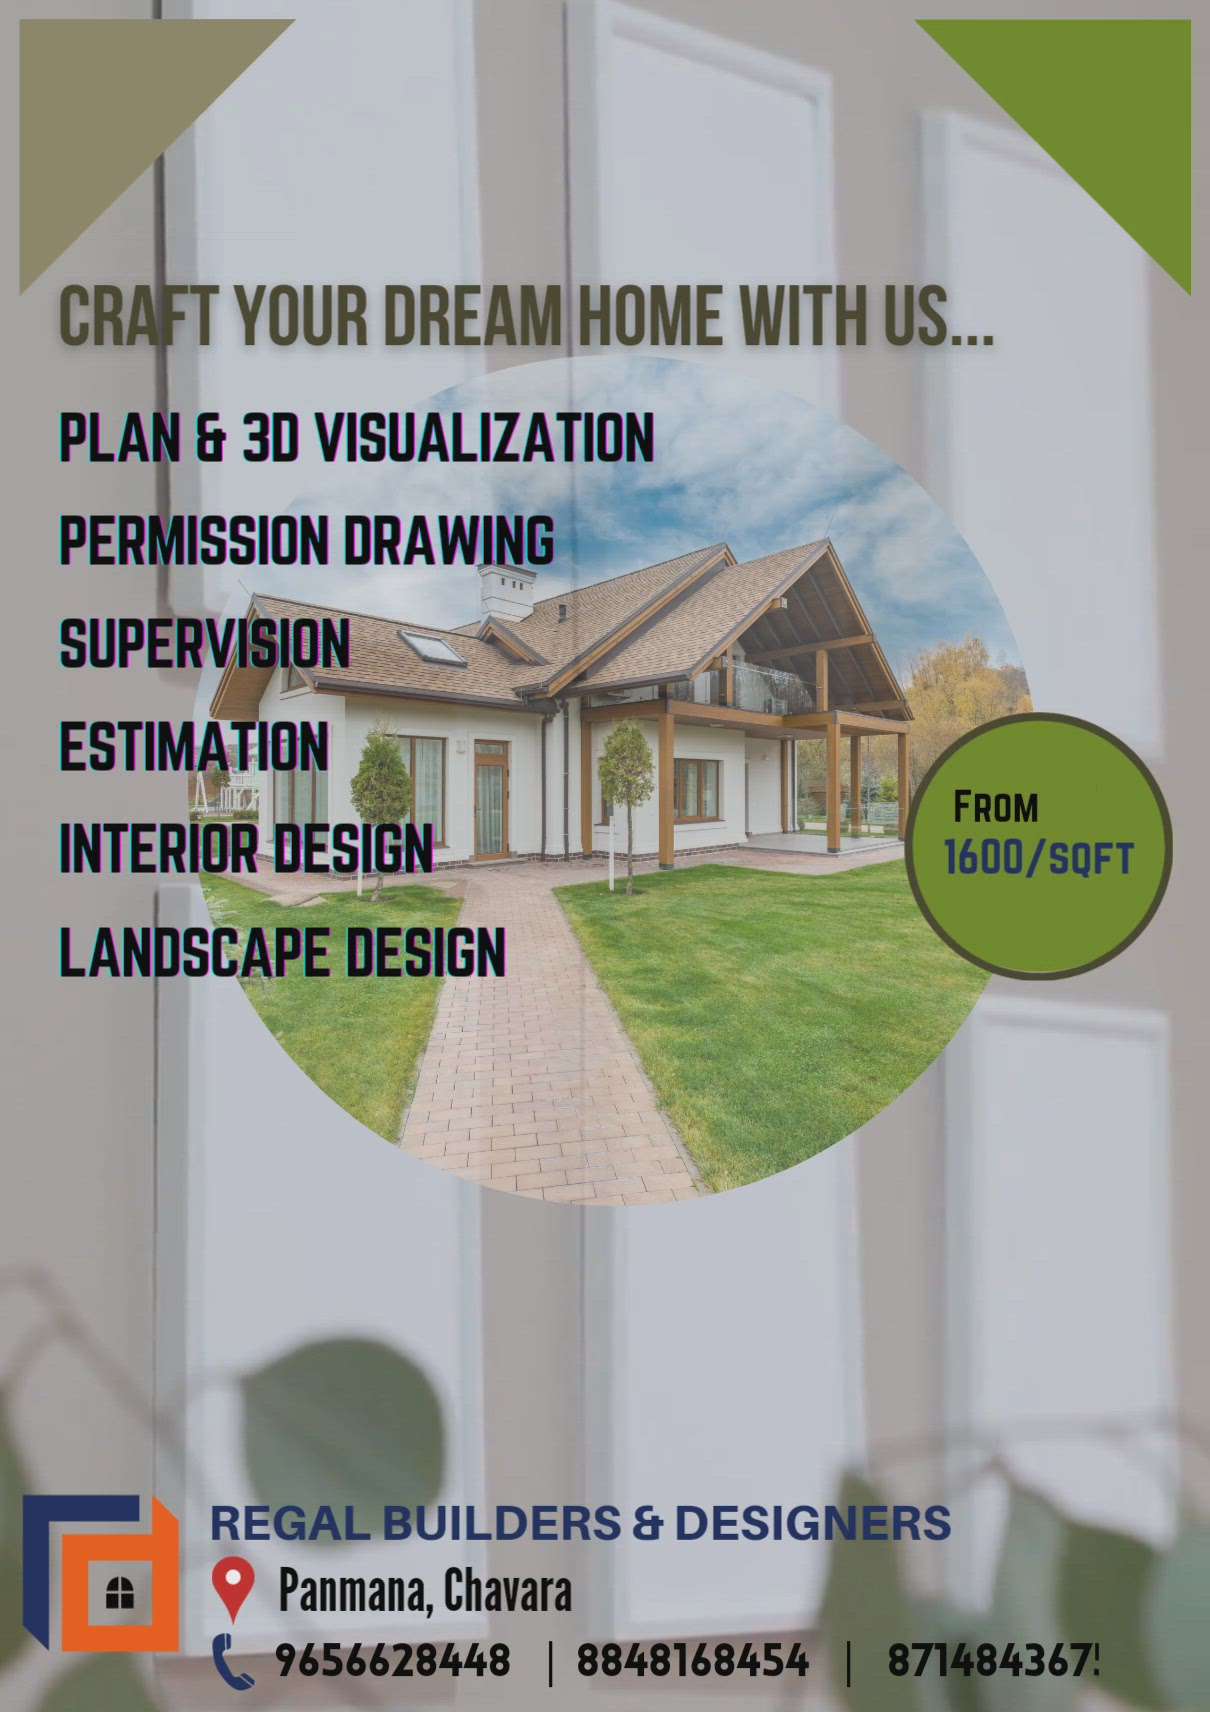 Dreams are meant to come true. We’ll make it happen for you

#houseconstruction#interiordesigners #technology#dreamhomes 
https://www.instagram.com/reel/CnpNKyWDJN8/?igshid=MDJmNzVkMjY=